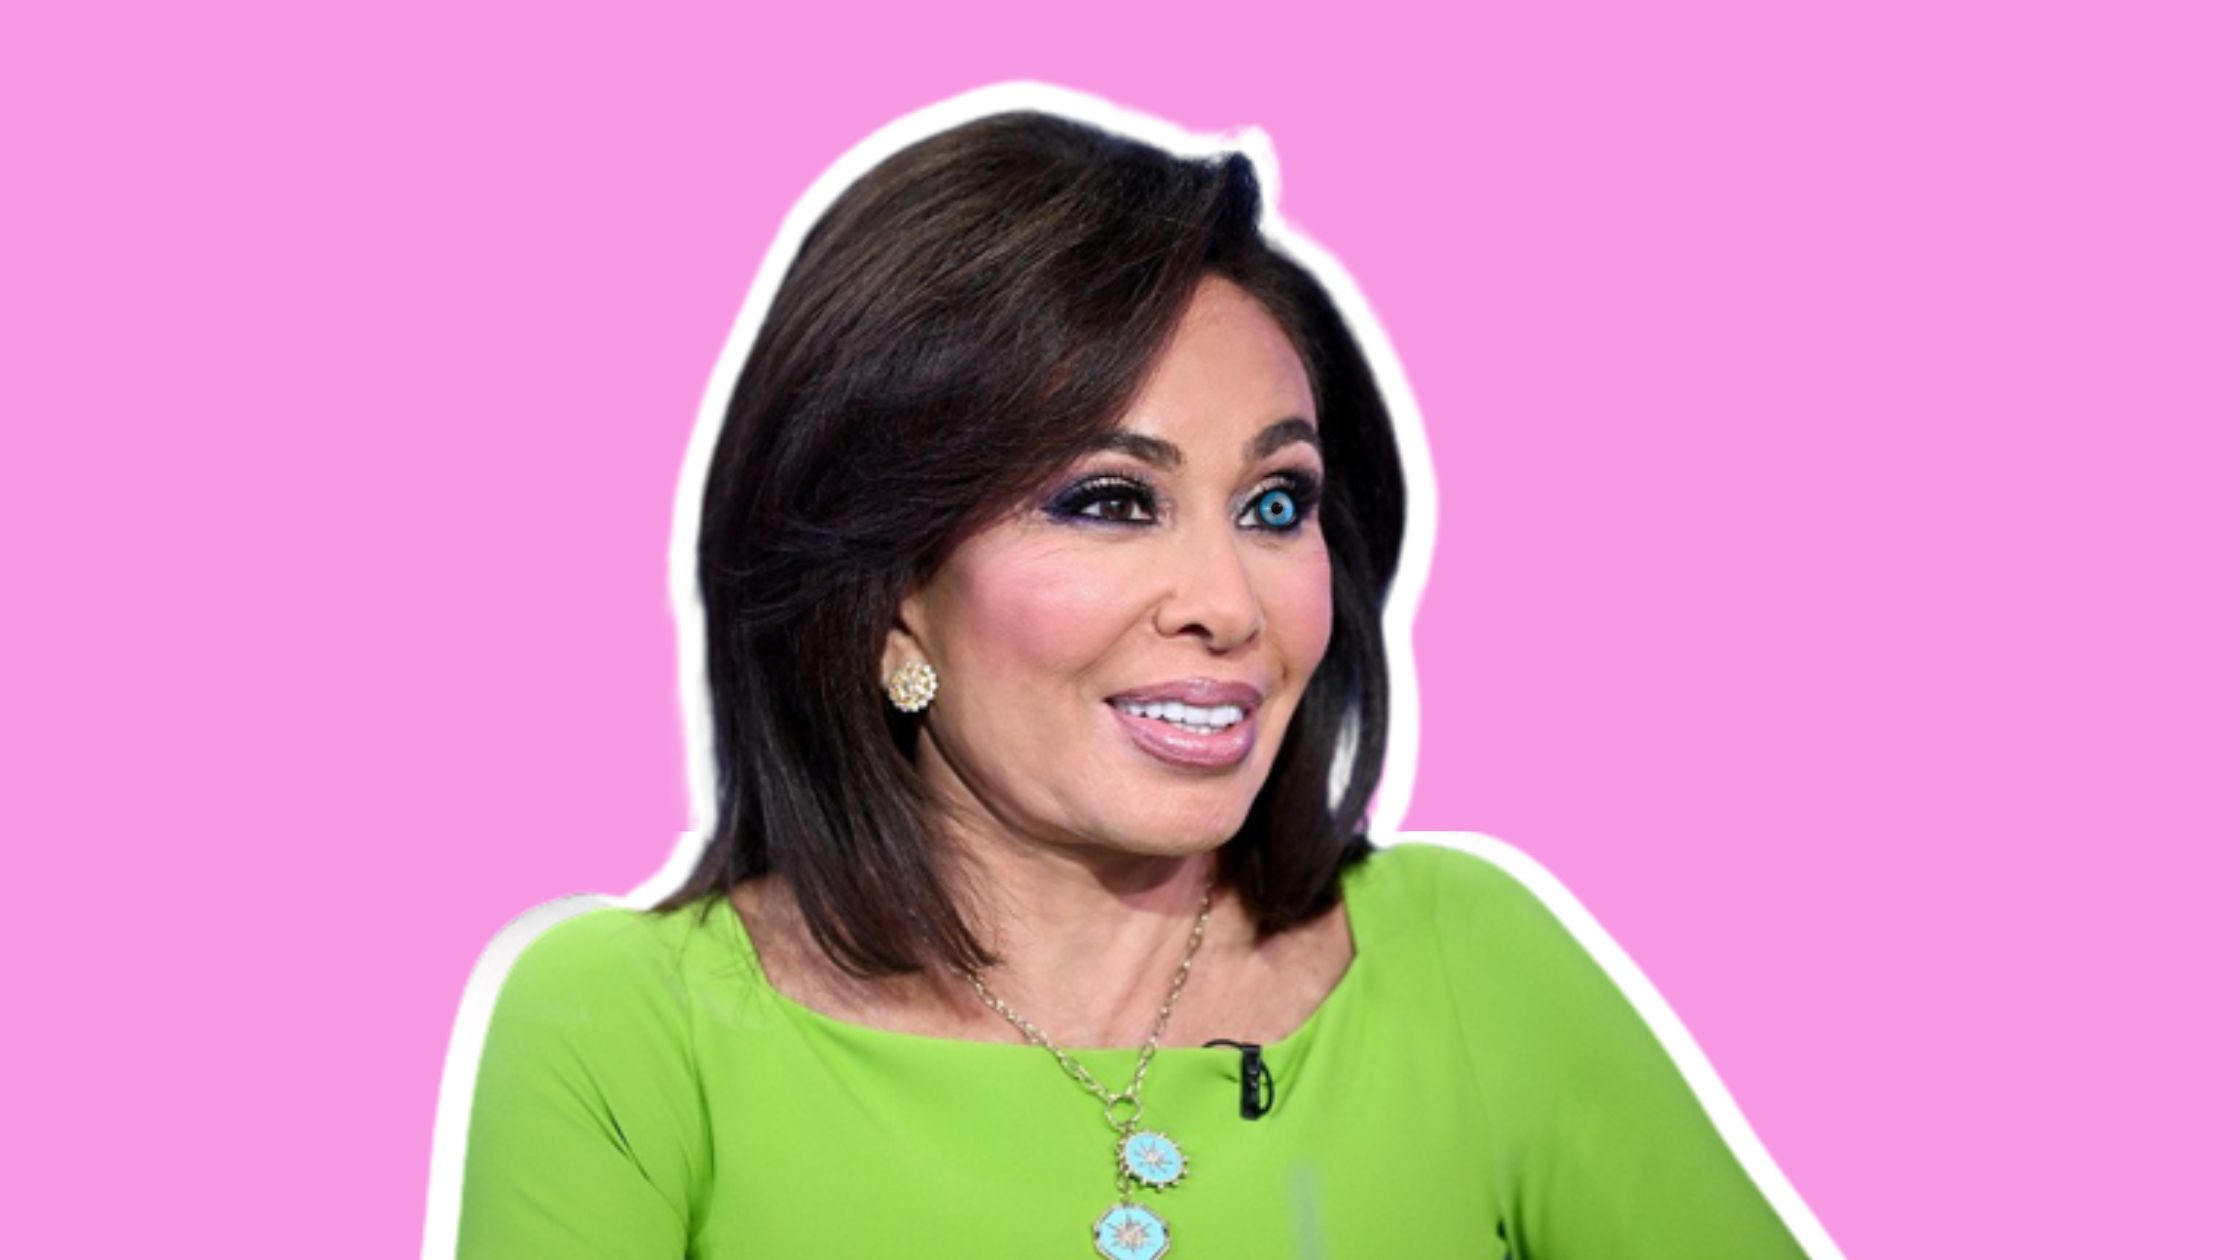 what happened to judge jeanine left eye